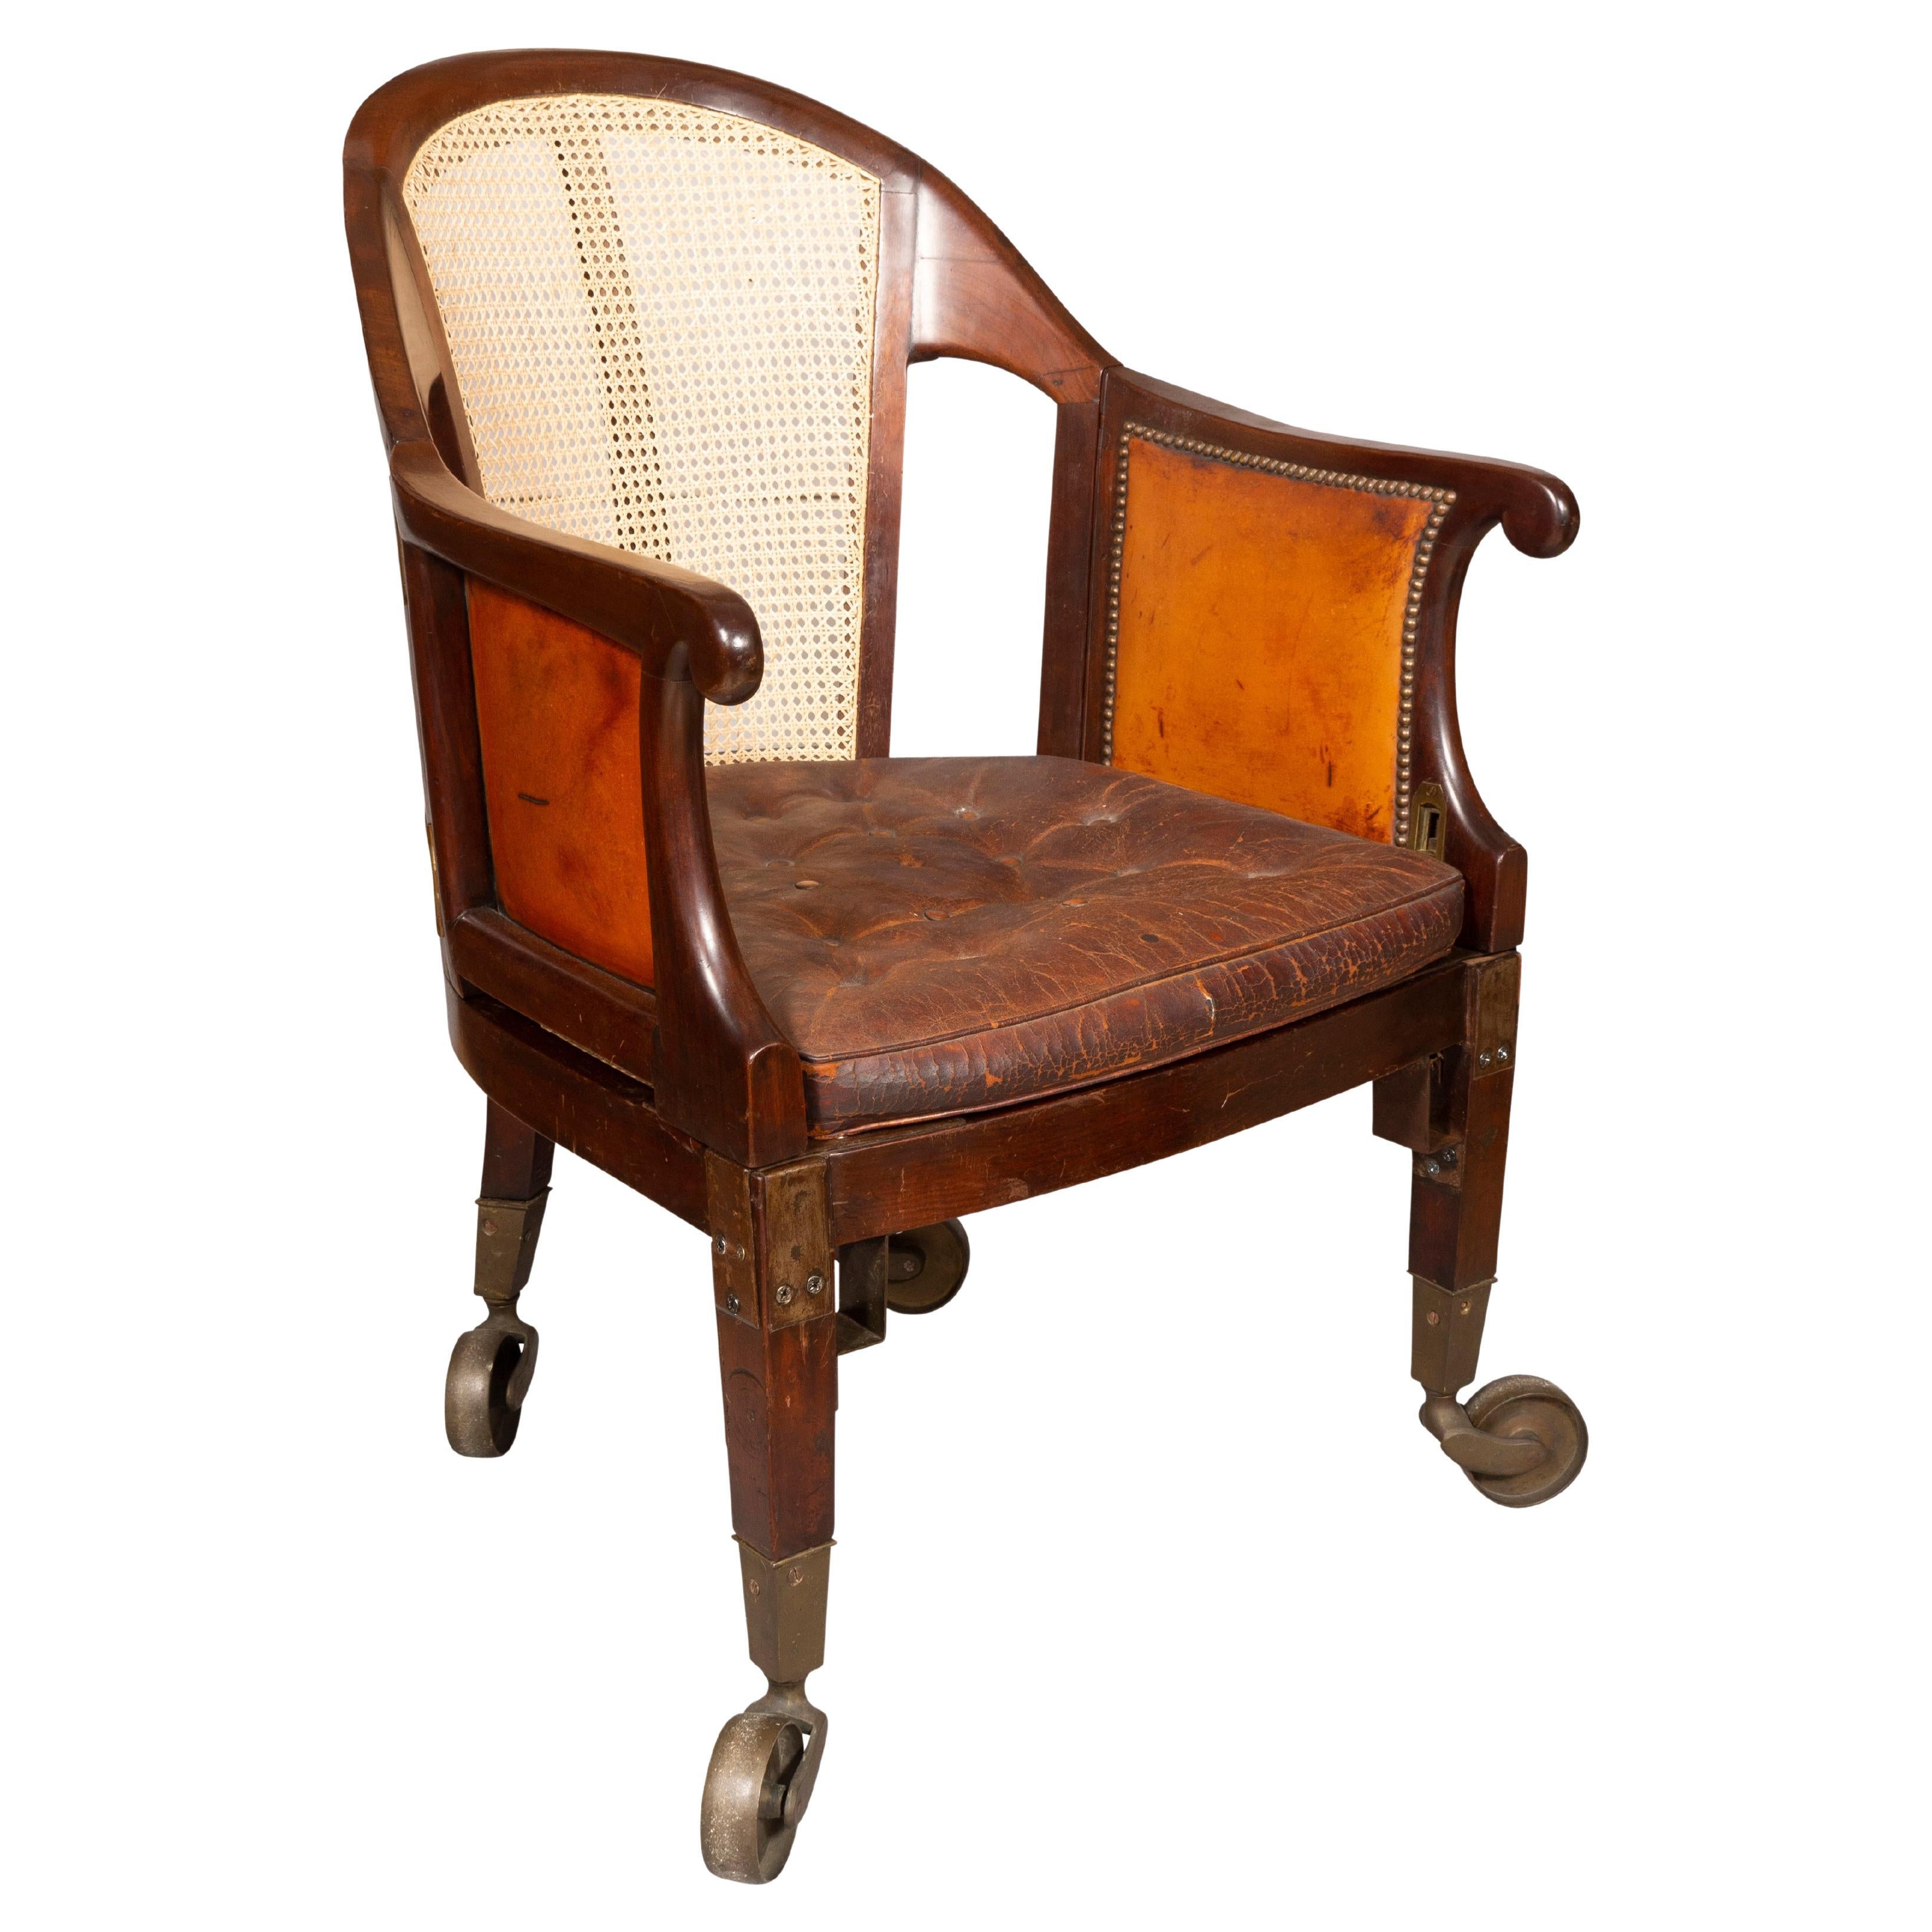 Unusual Regency Mahogany and Brass Campaign Chair